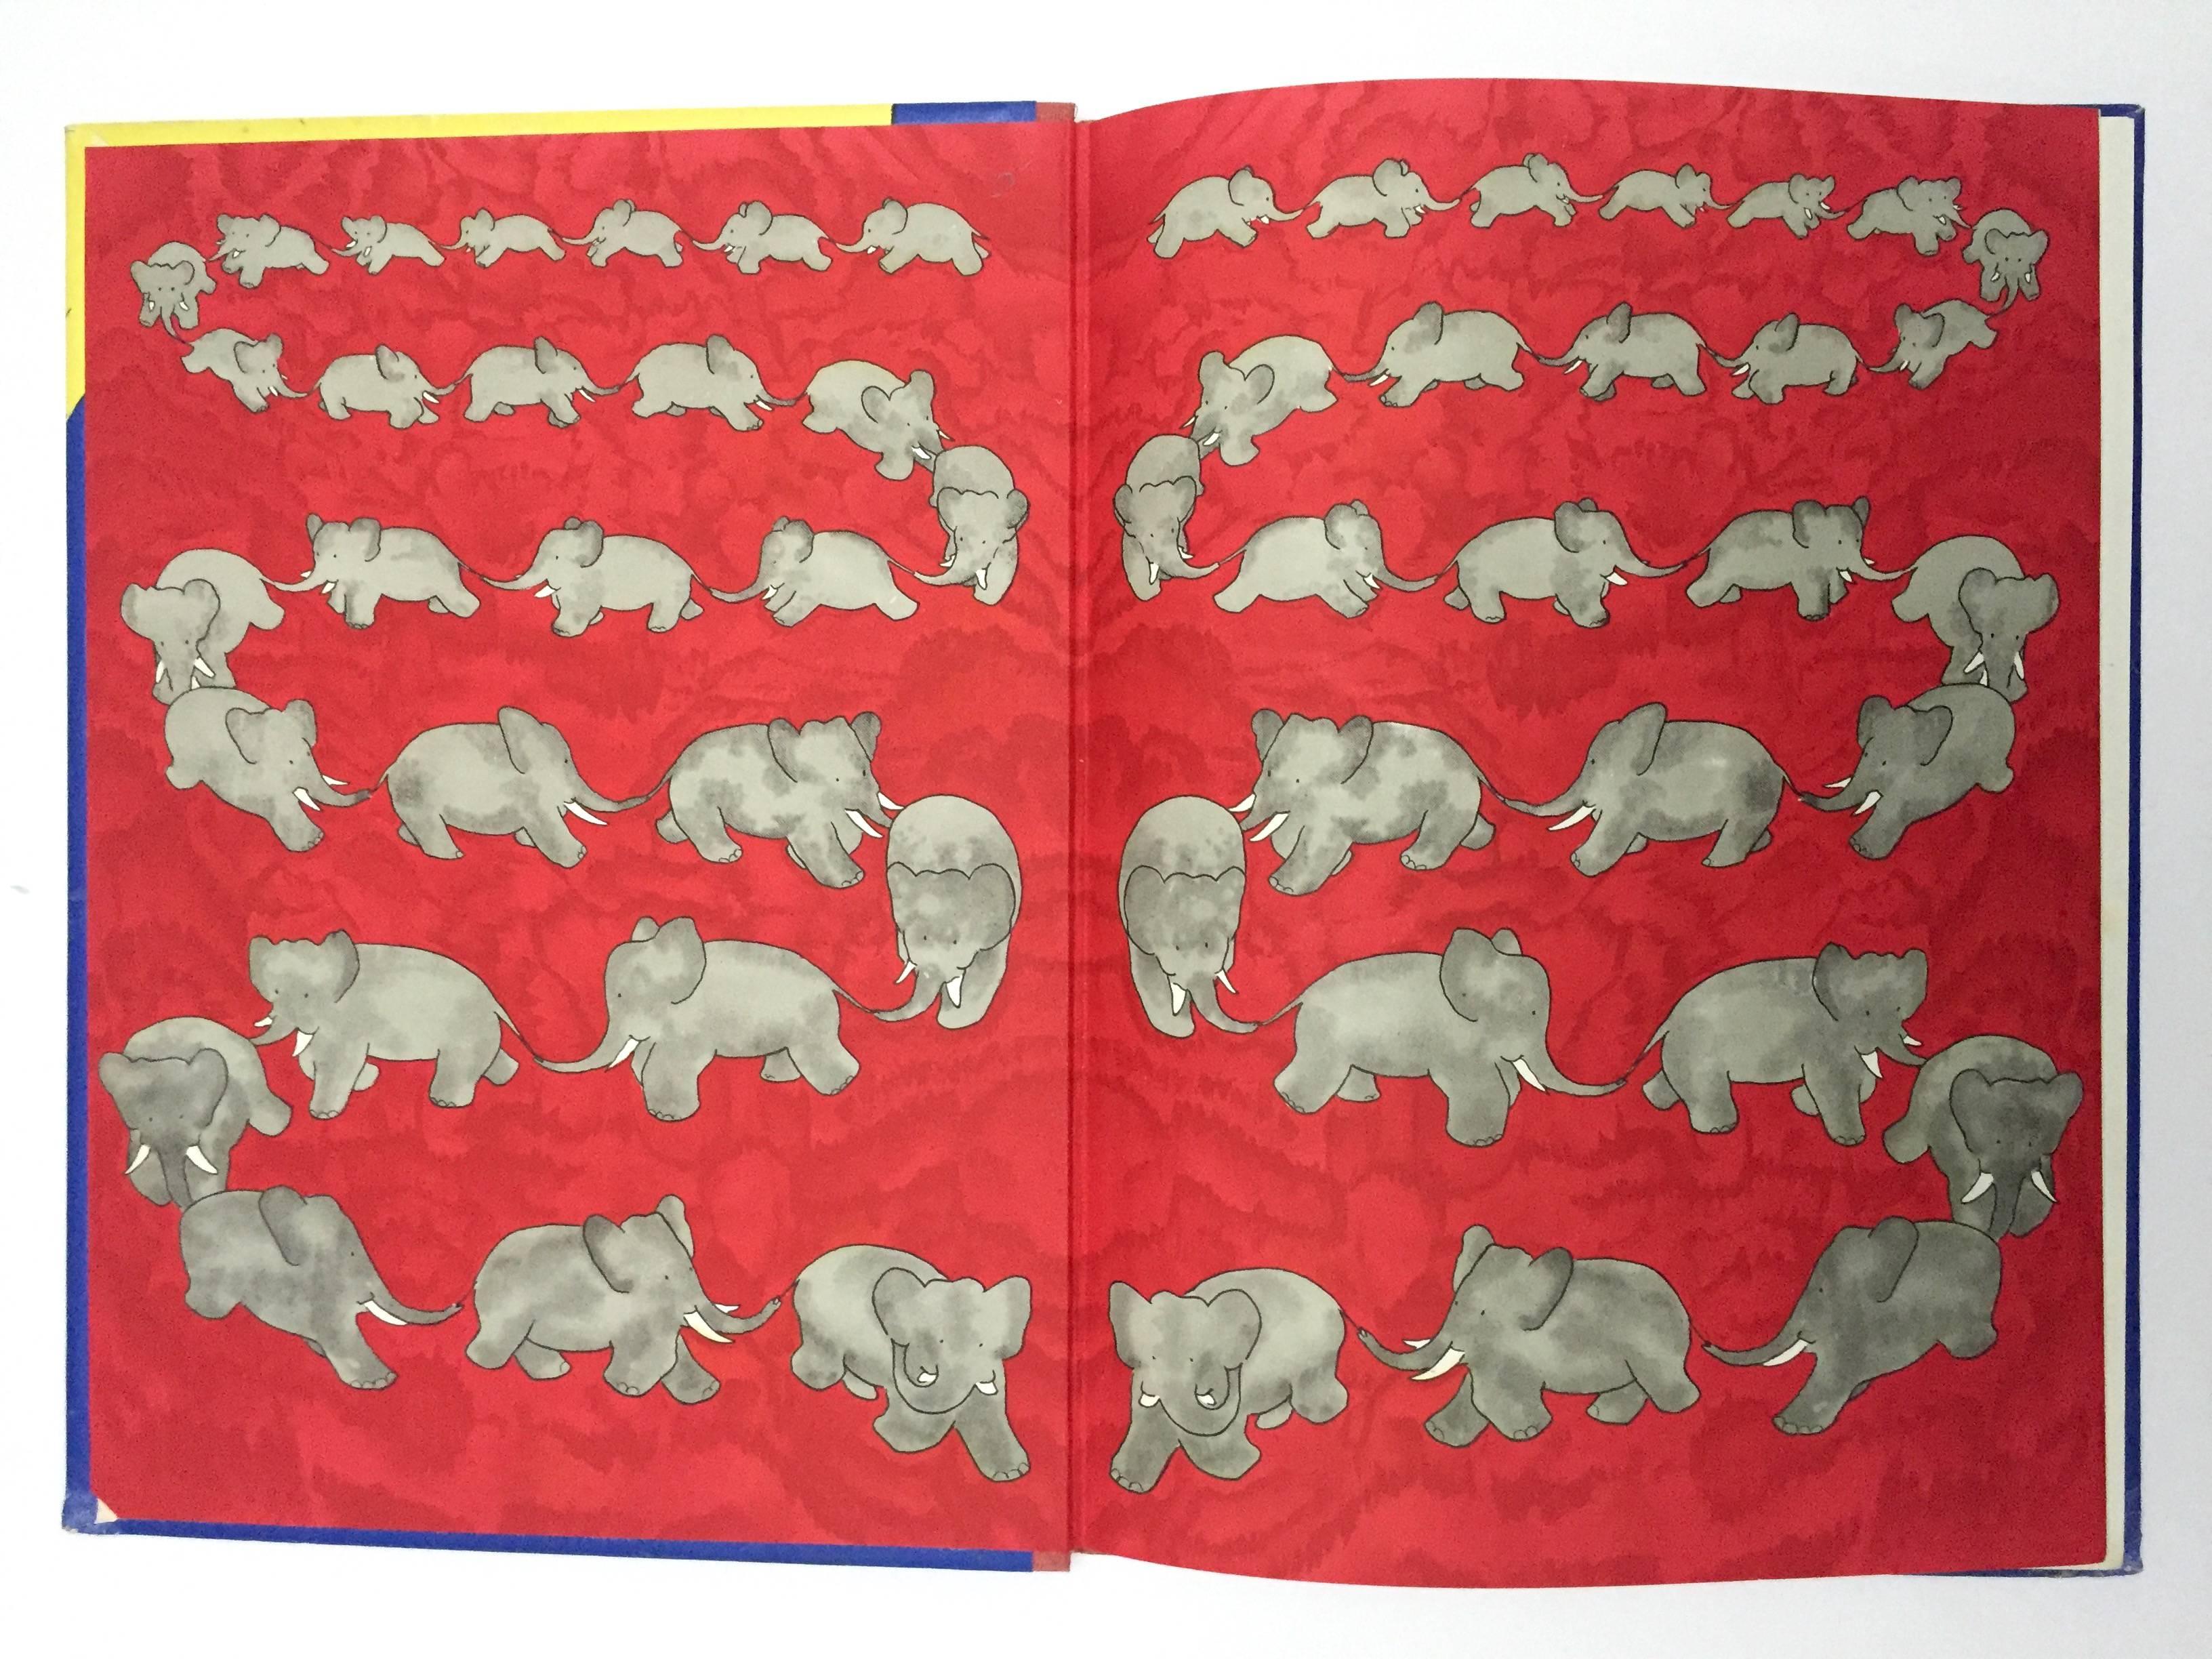 First edition, published by Condé Nast, 1931.

Babar the elephant is undoubtedly one of the worlds' most loved children's book characters and some say a characterization of Brunhoff himself. This incredibly sought after Condé Nast first edition